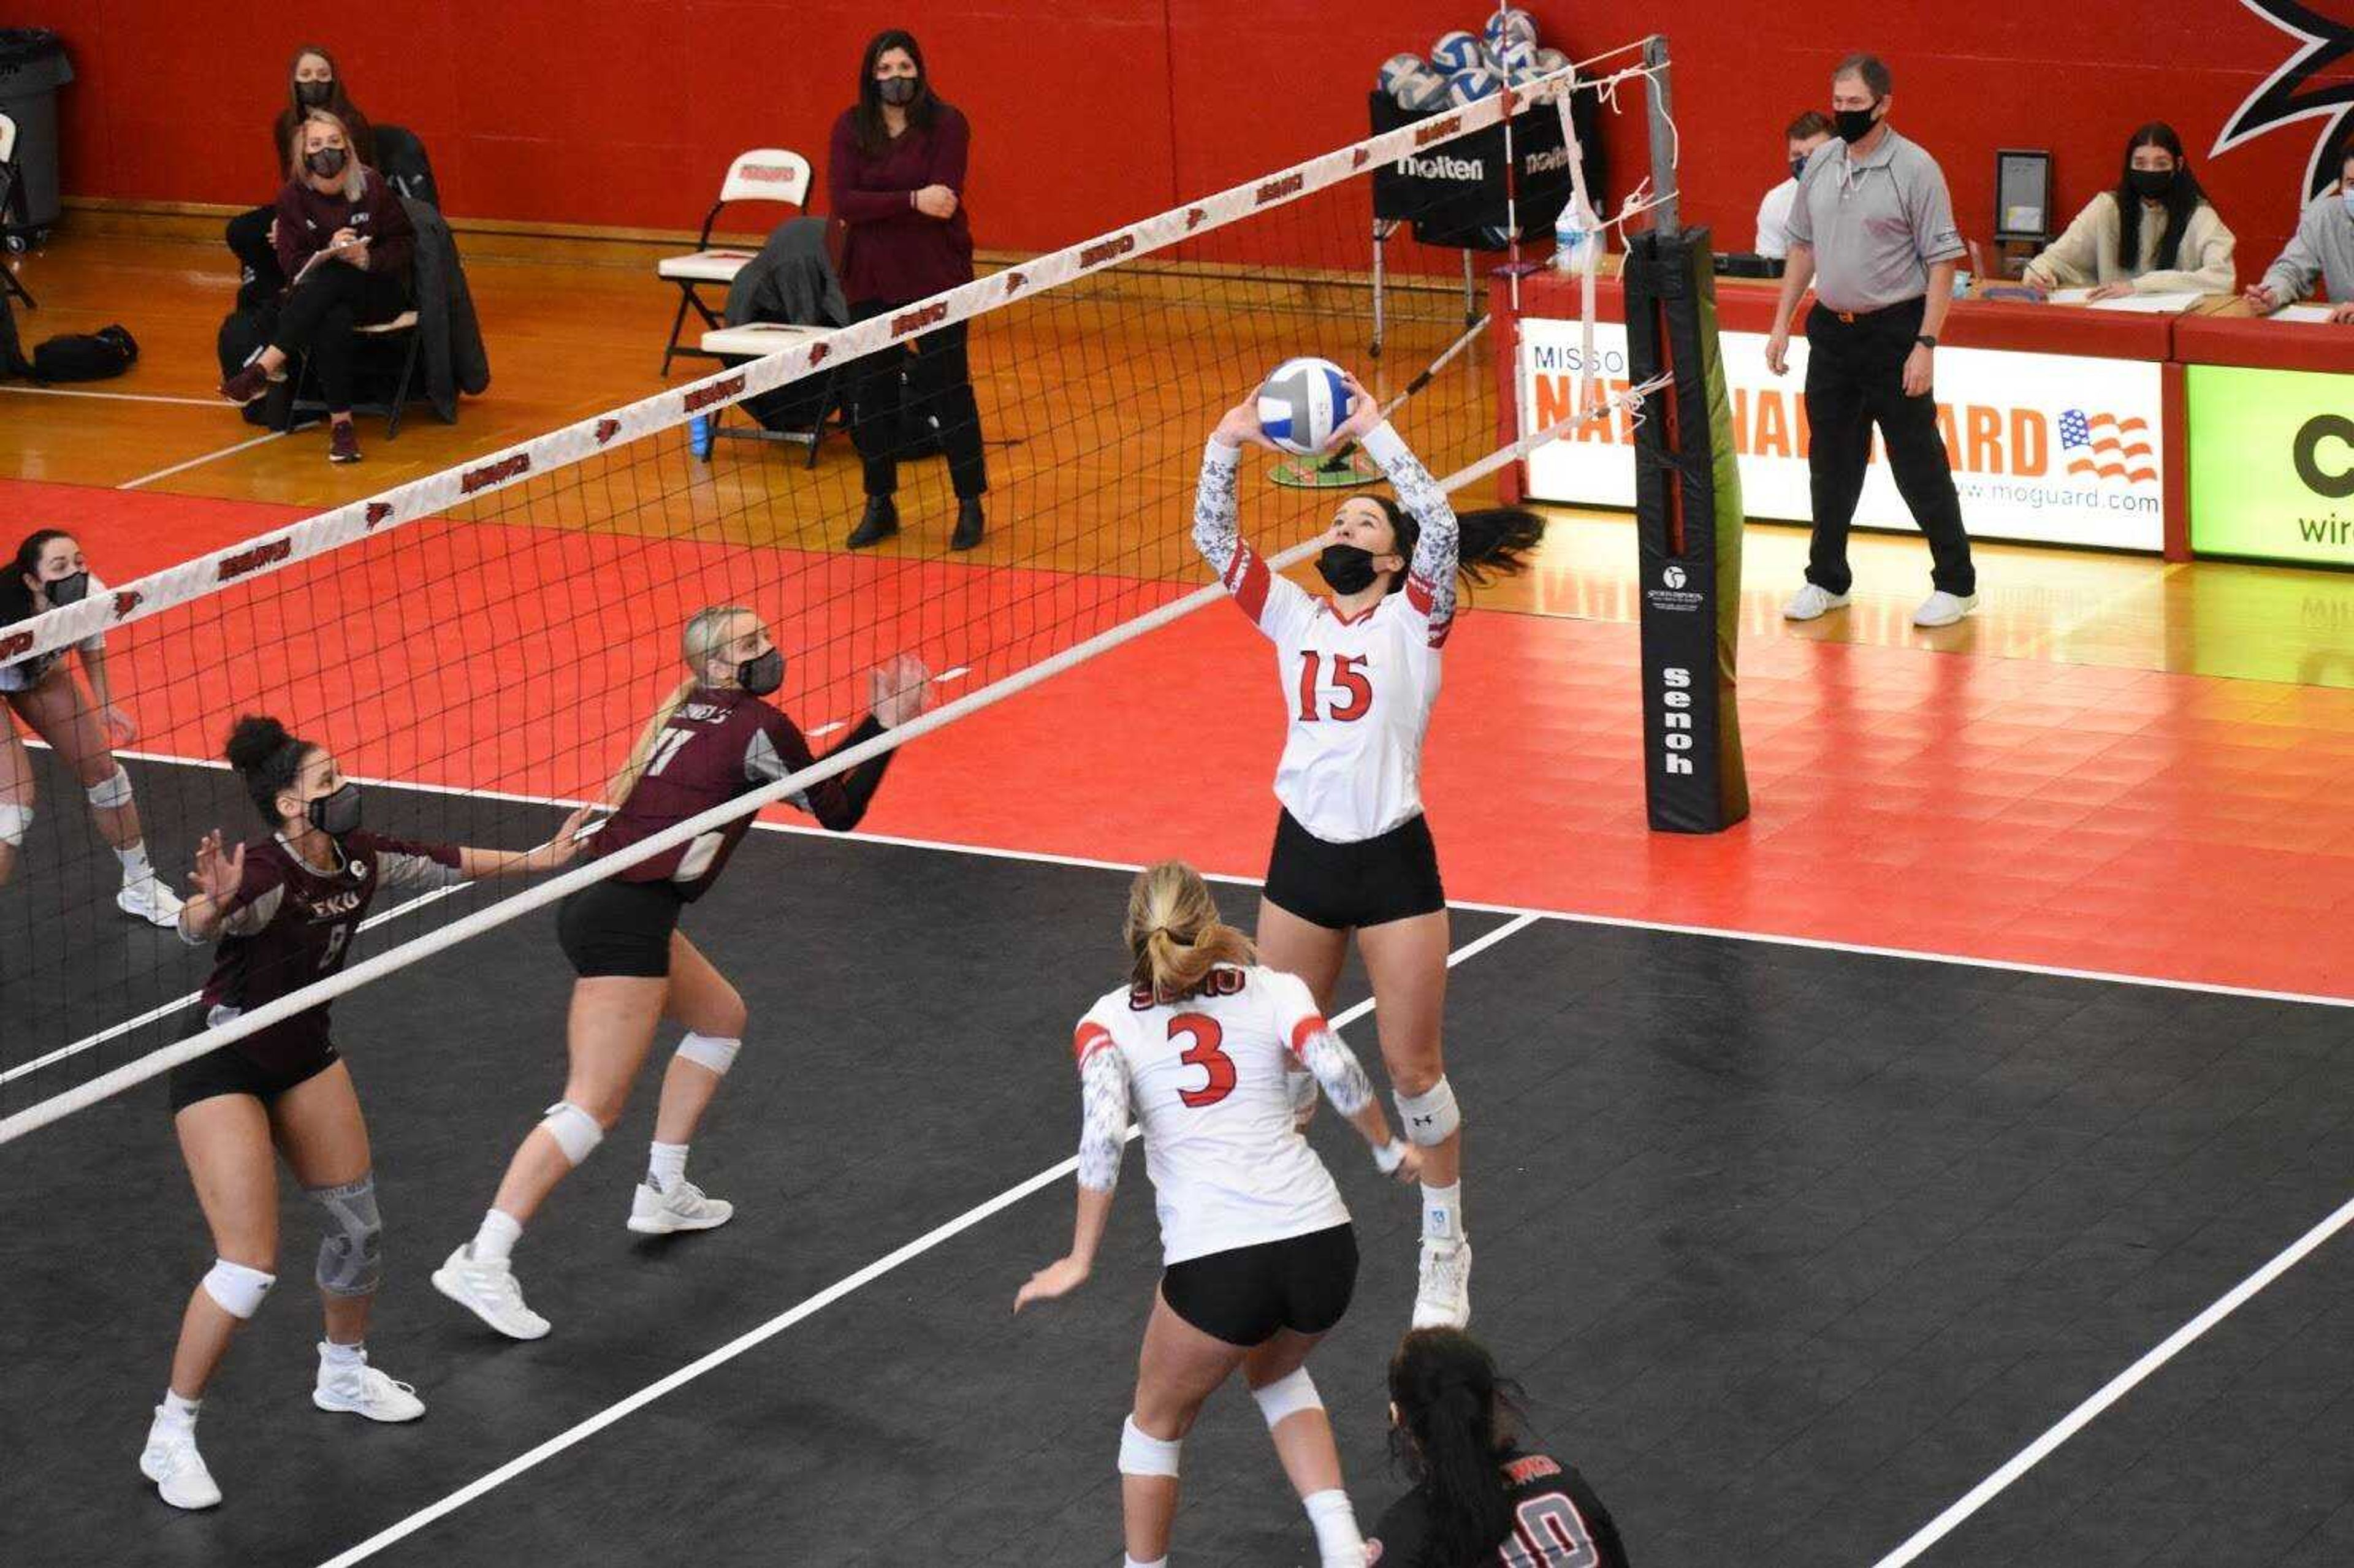 Junior setter Claire Ochs sets the ball for senior middle blocker Maggie Adams during a pair of four-set wins for Southeast over EKU on Feb. 14 at Houck Field House in Cape Girardeau.